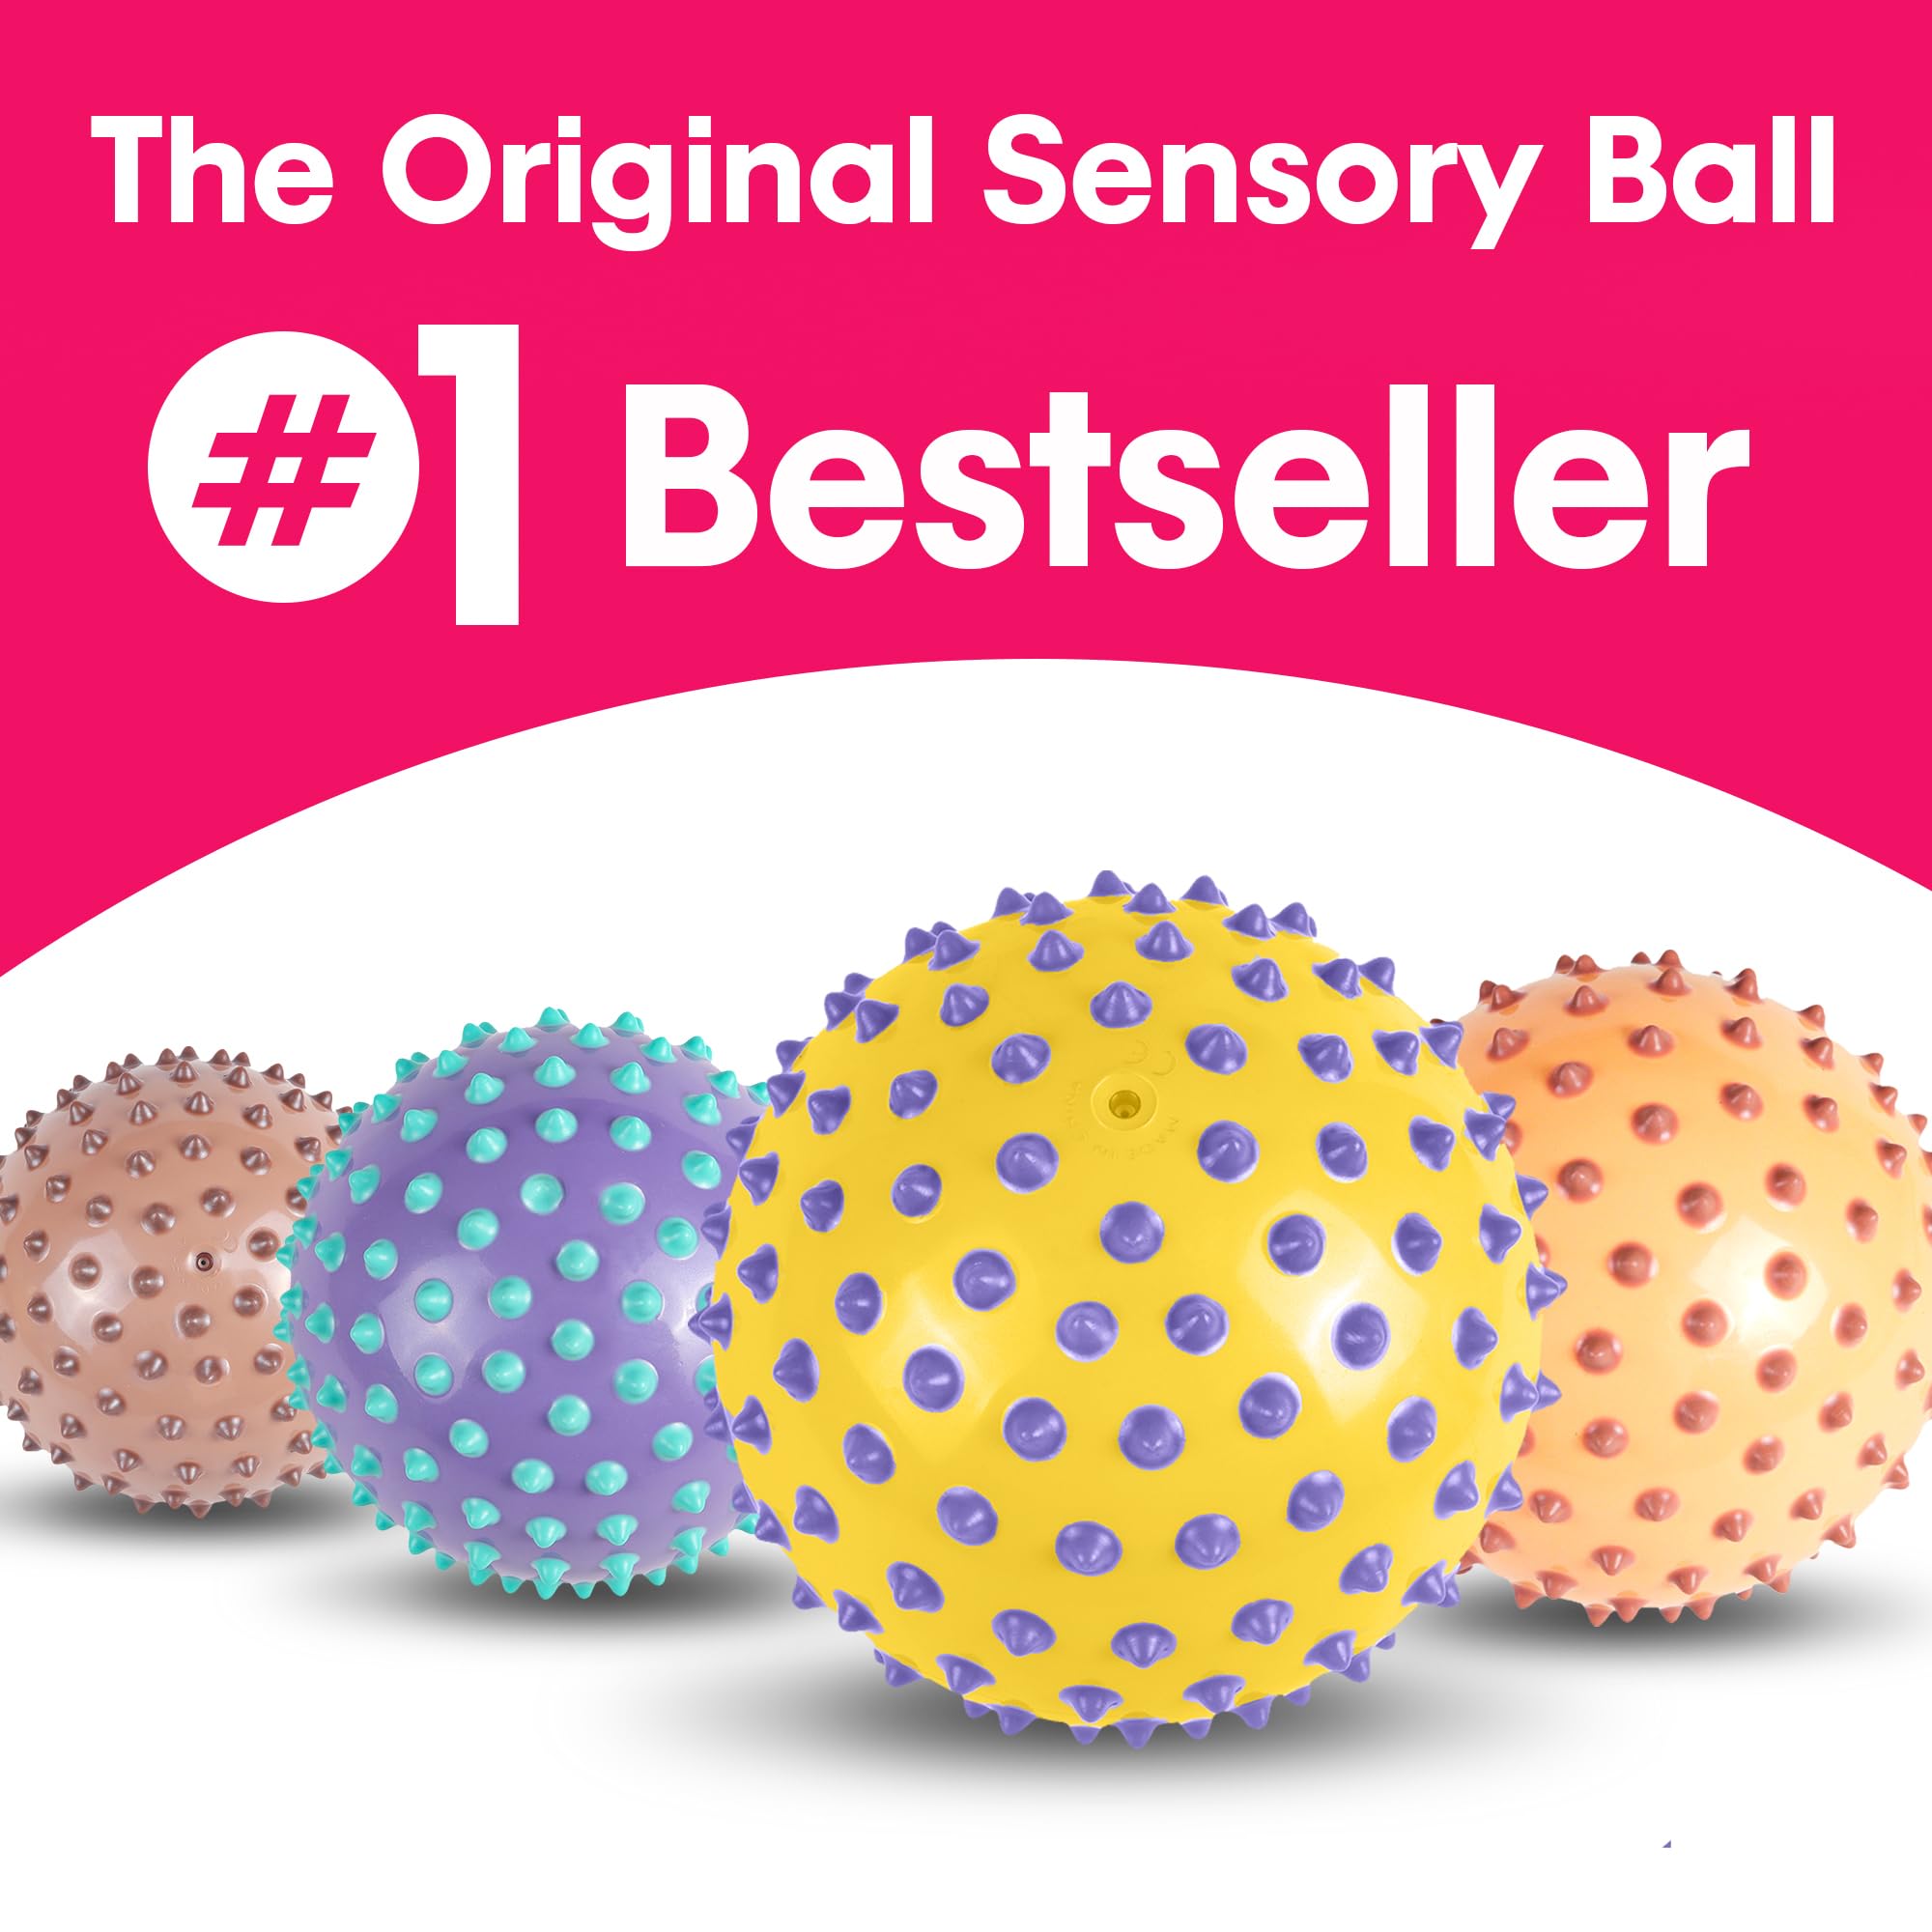 Edushape Sensory Ball for Baby - 7” Yellow/Purple Trendy Color Dots Baby Ball That Helps Enhance Gross Motor Skills for Kids Aged 6 Months & Up - Pack of 1 Vibrant Colorful and Unique Toddler Ball